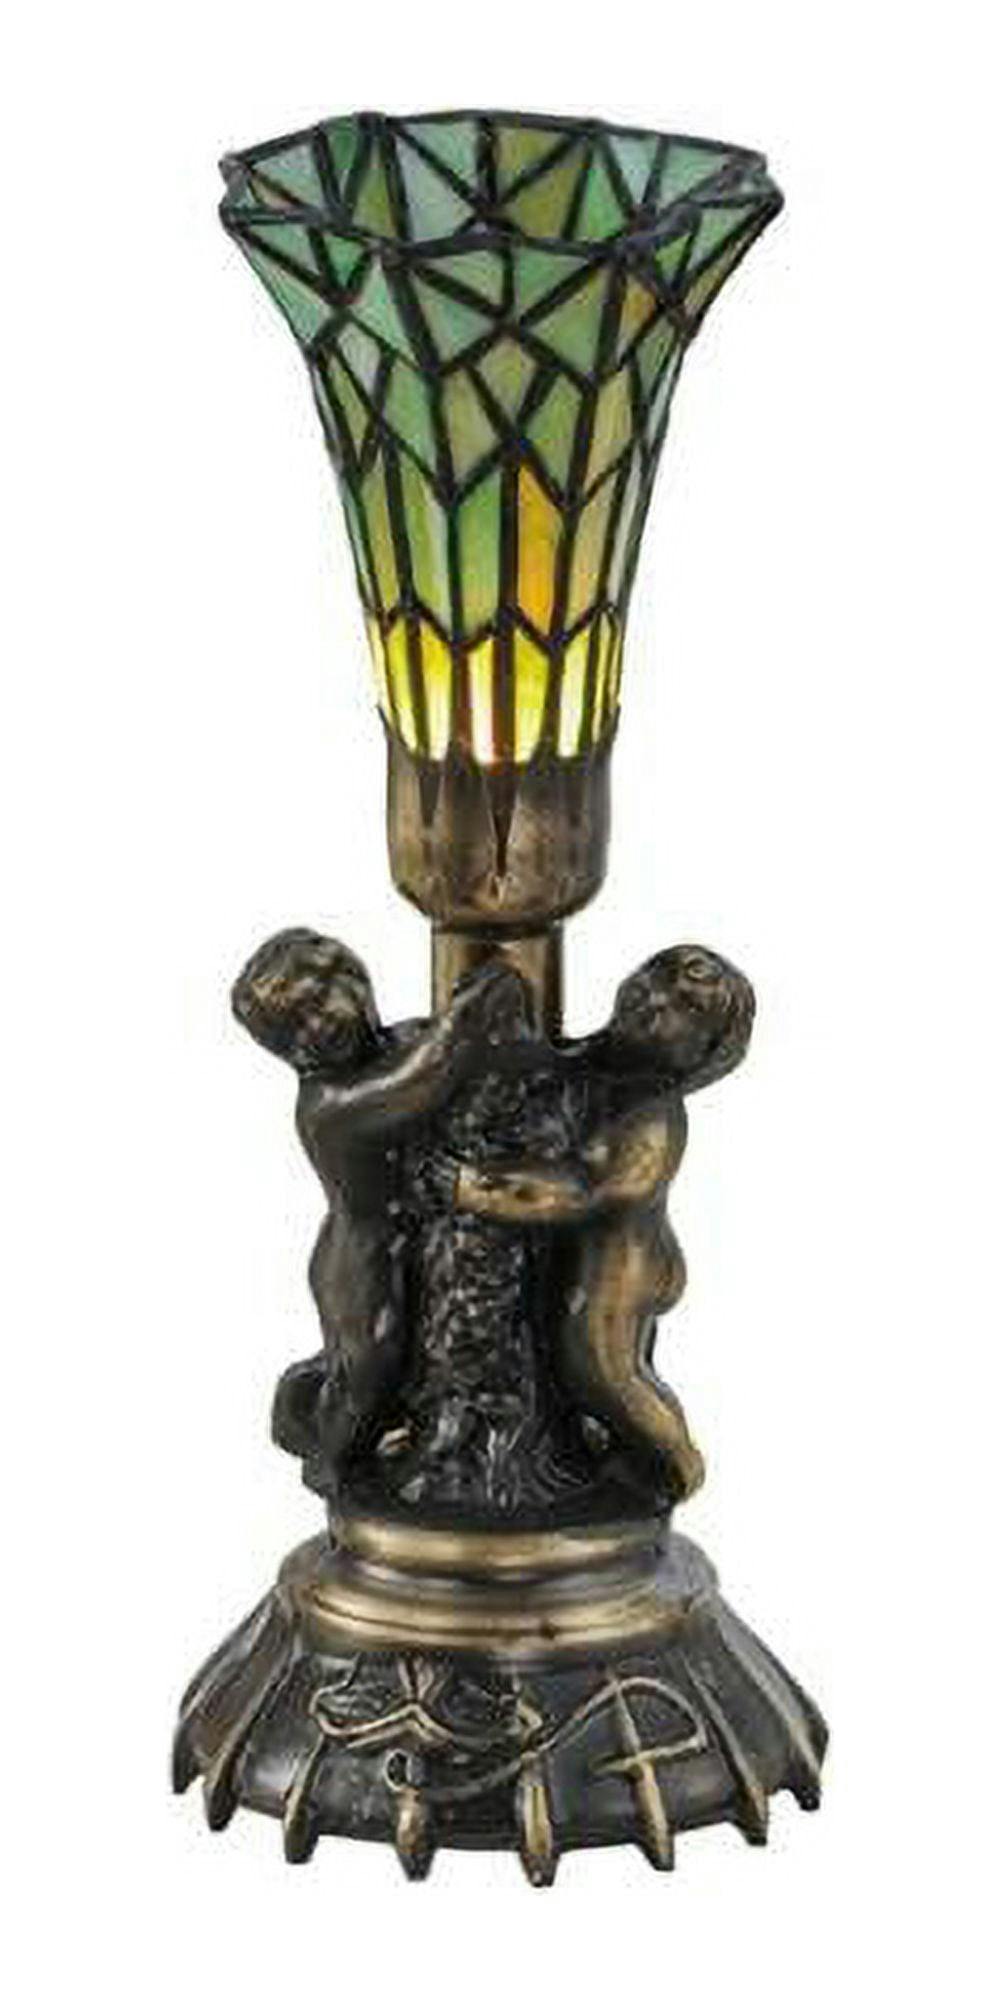 Twin Cherub Tiffany Pond Lily 13" Stained Glass Table Lamp